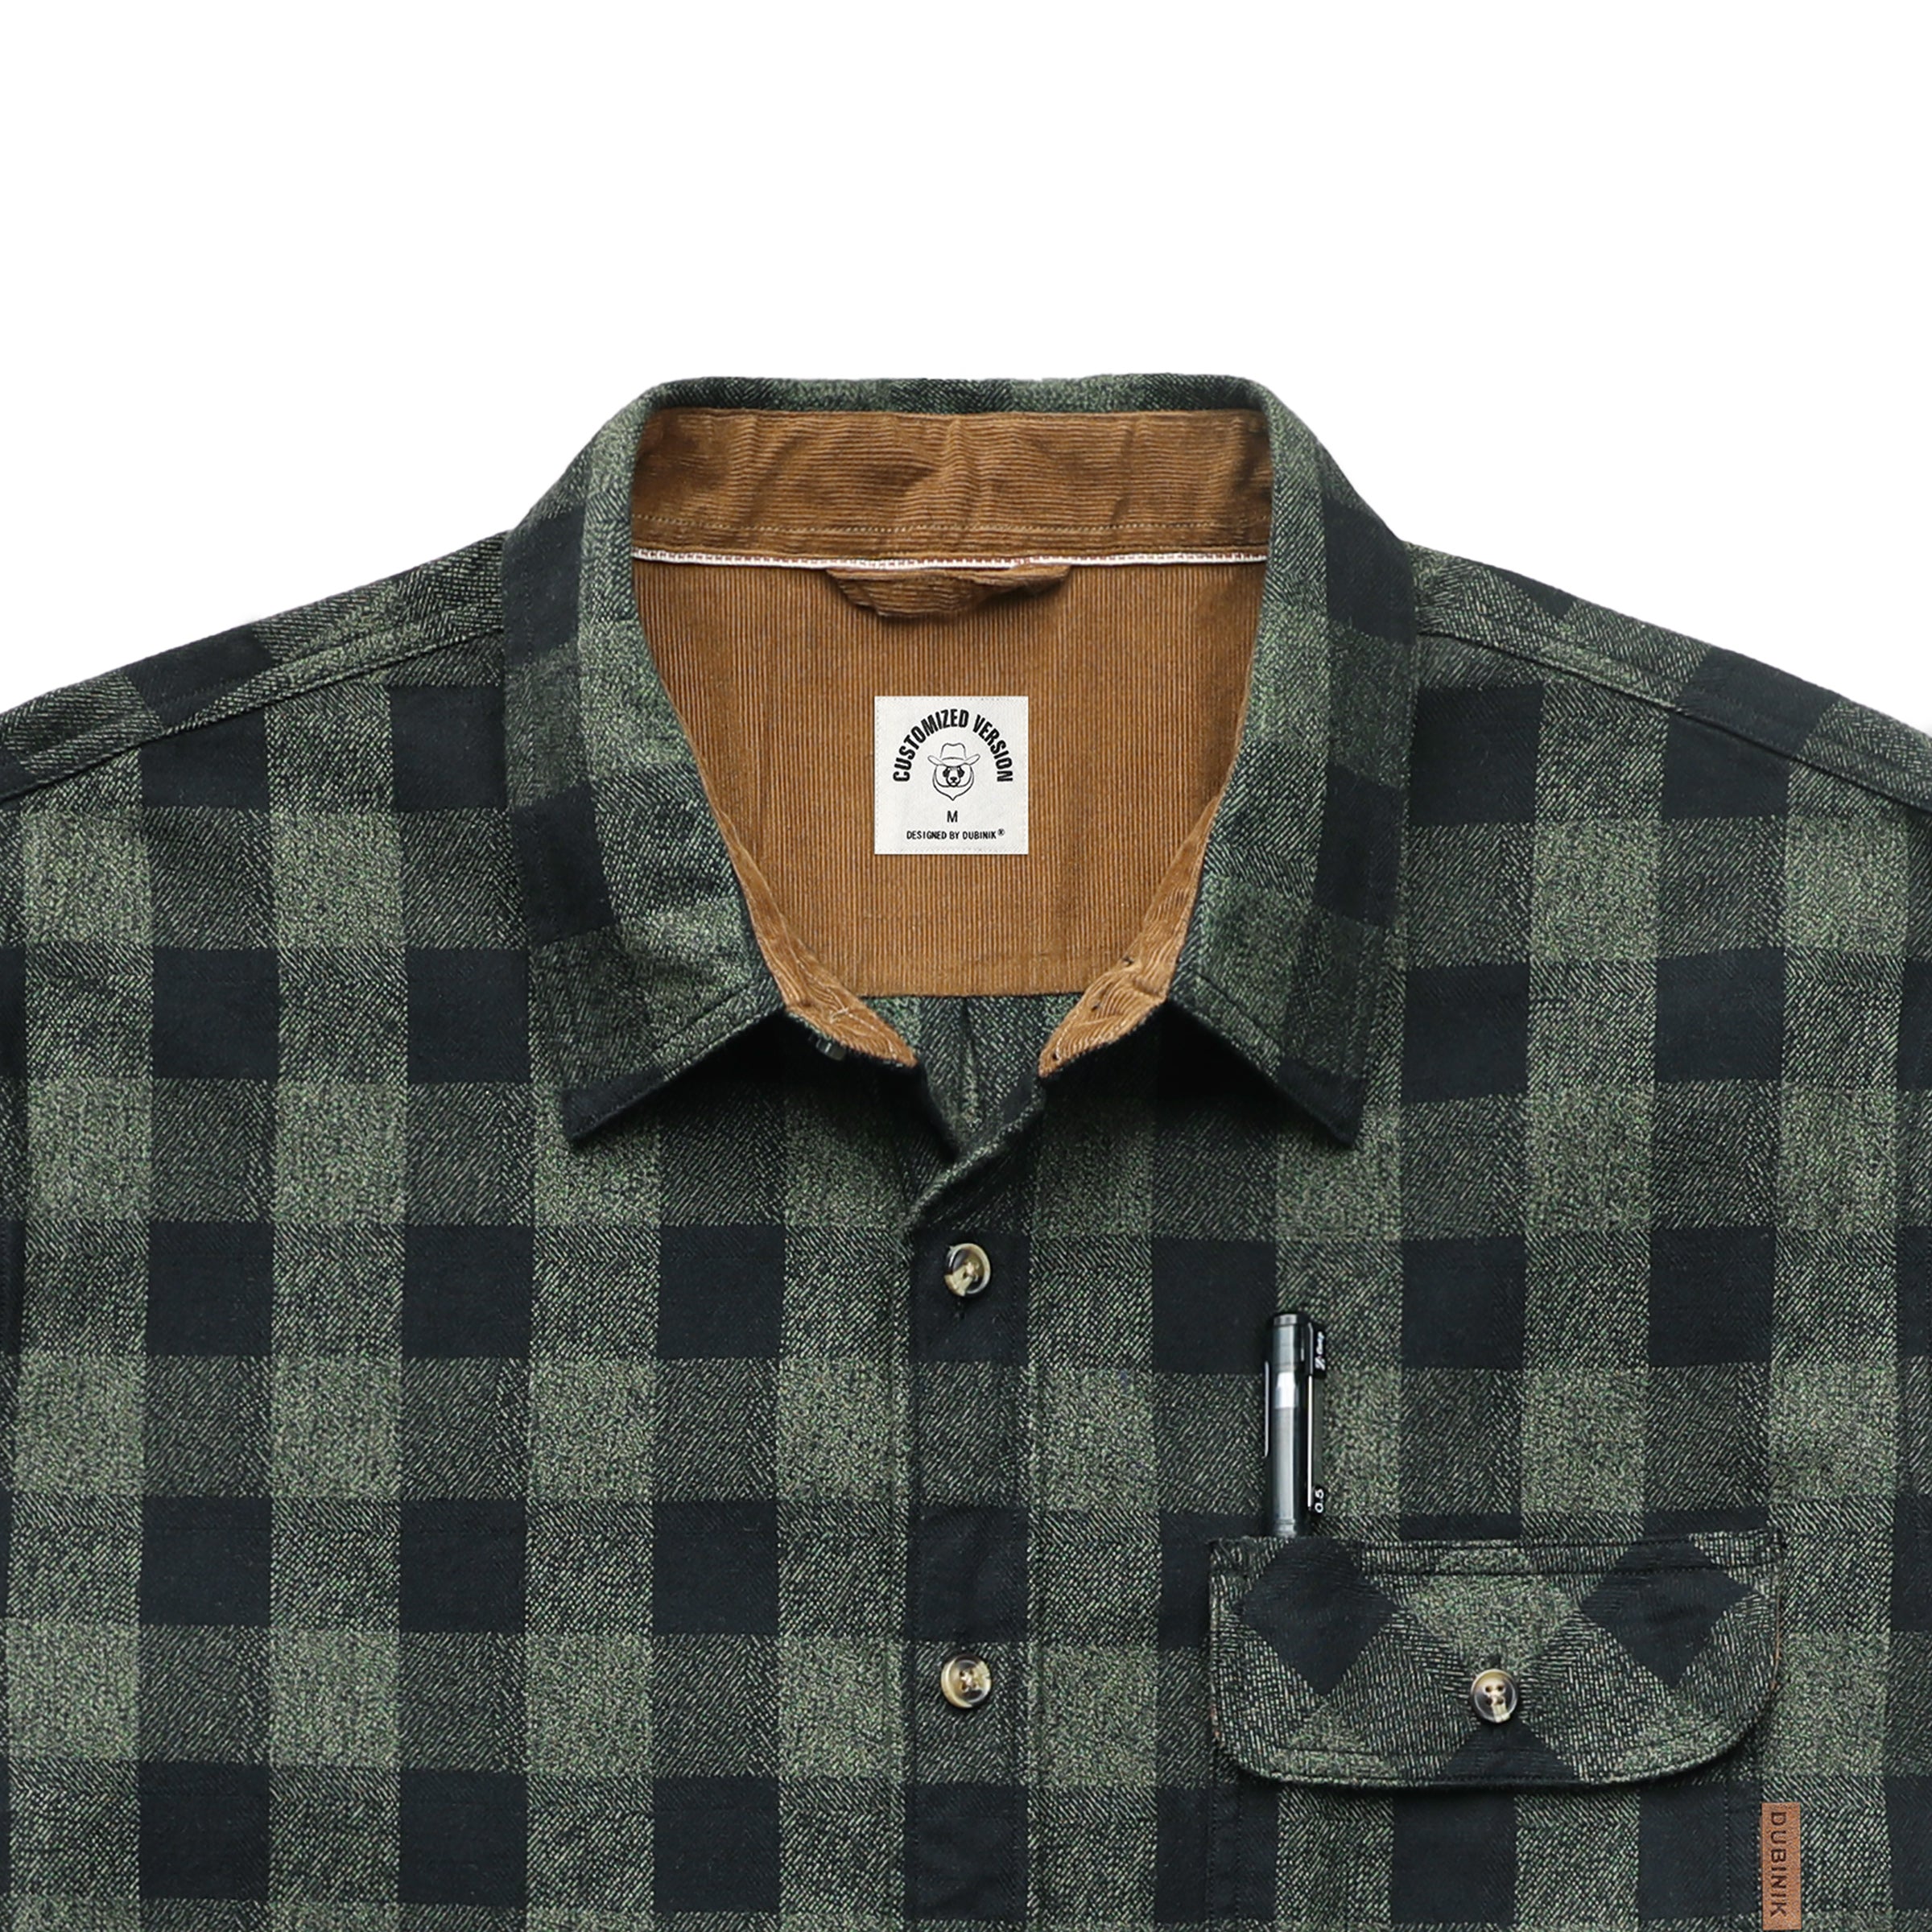 Mens Flannel Shirts Long Sleeve Flannel Shirt for Men Casual Button Down Brushed 100% Cotton Shirt #1018